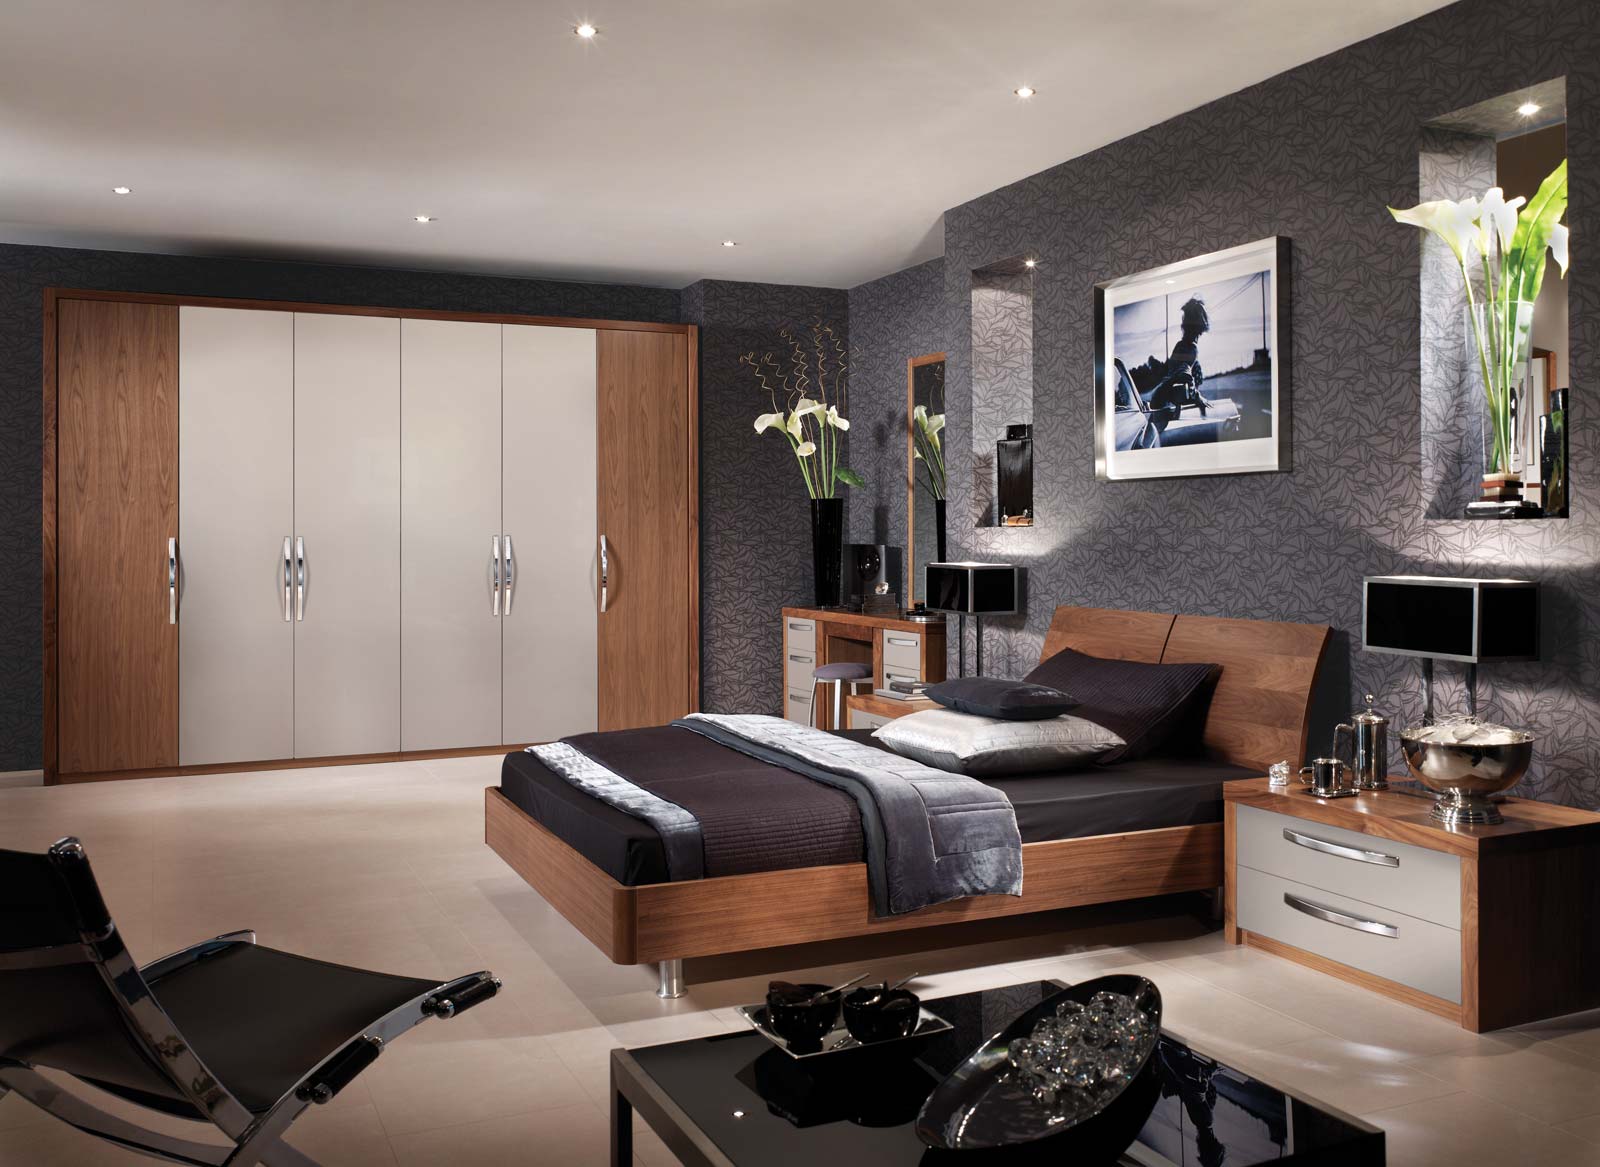 Strachan fitted modern bedroom furniture